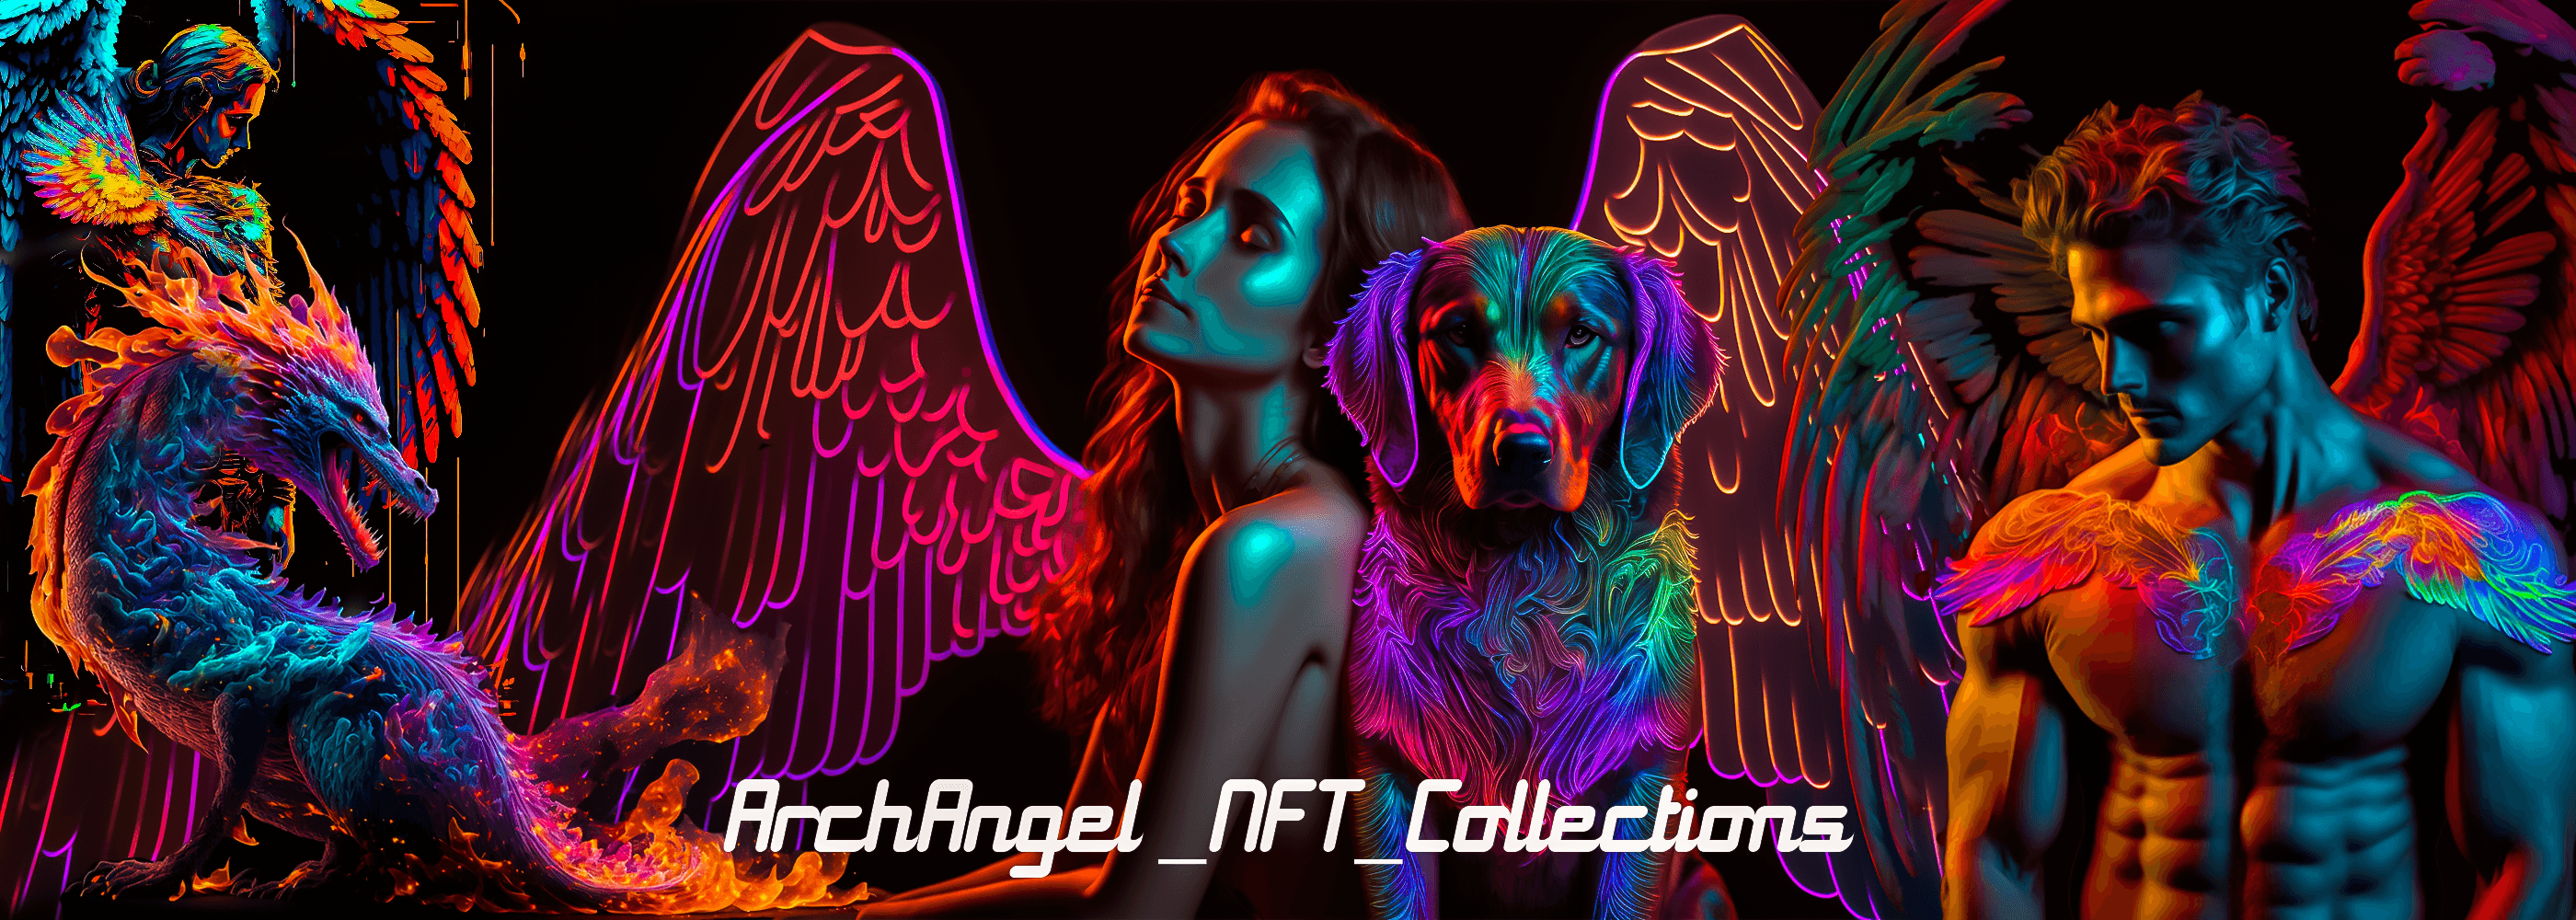 ArchAngel_NFT_Collections banner